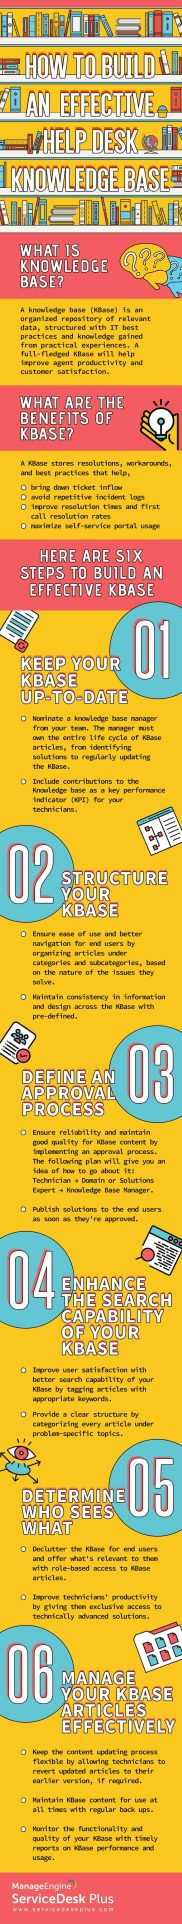 How To Build An Effective Help Desk Knowledge Base (KBase)